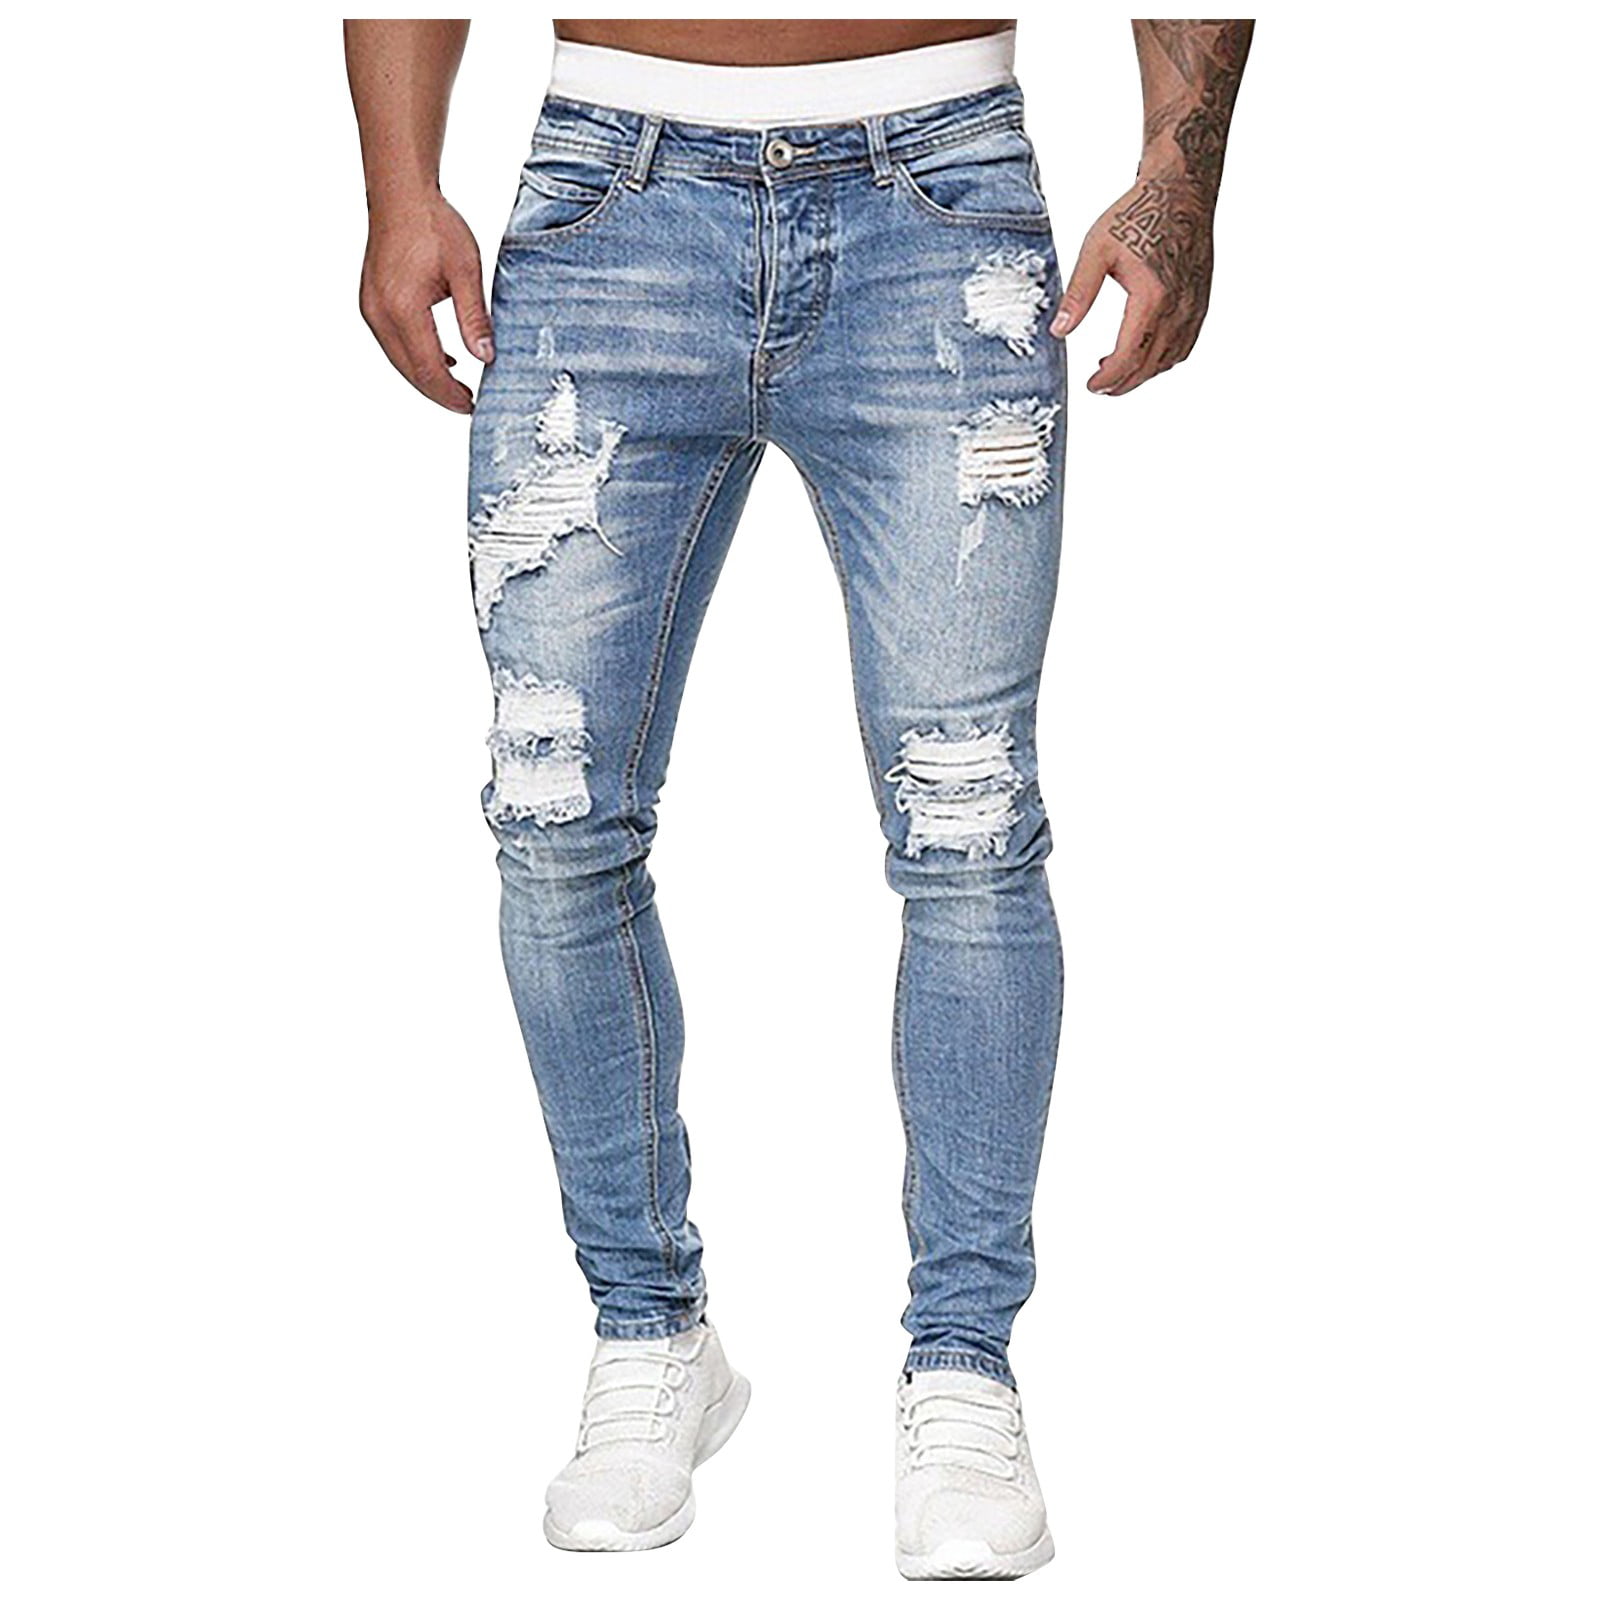 Qcmgmg Men's Slim Fit Jeans Stretch Destroyed Ripped Skinny Jeans Side ...